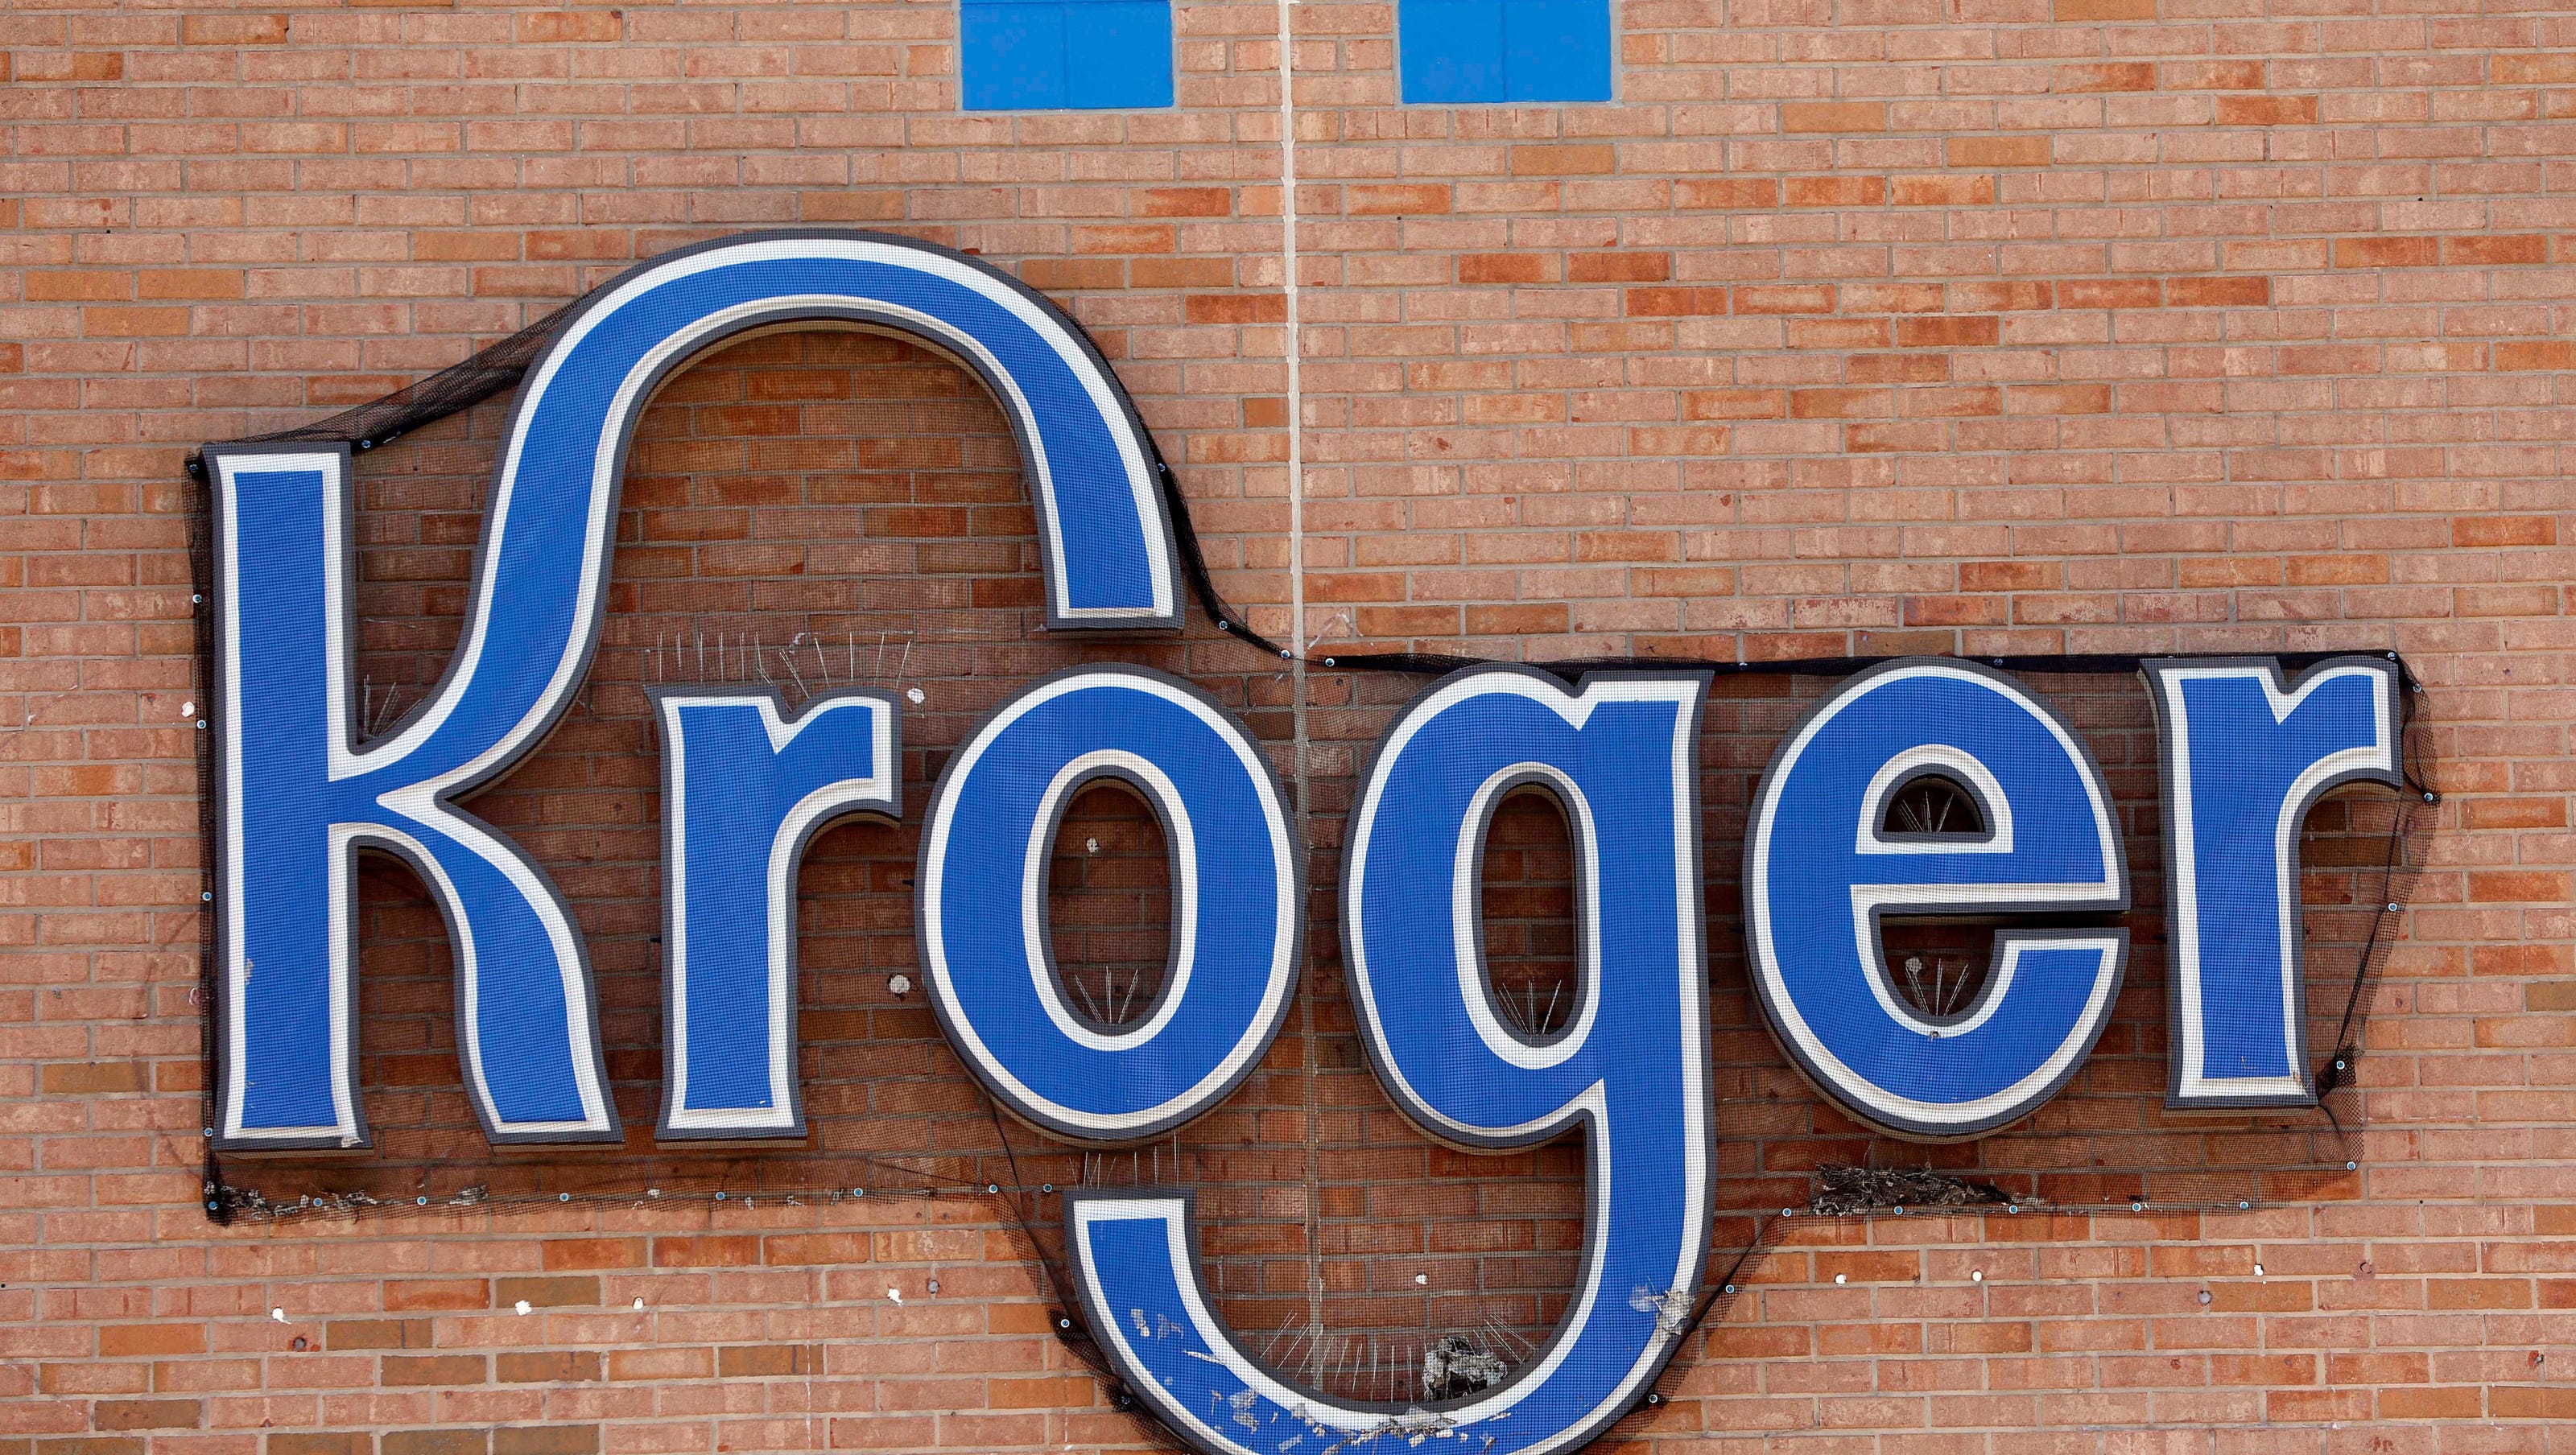 Why there are no Kroger stores in North Jersey.